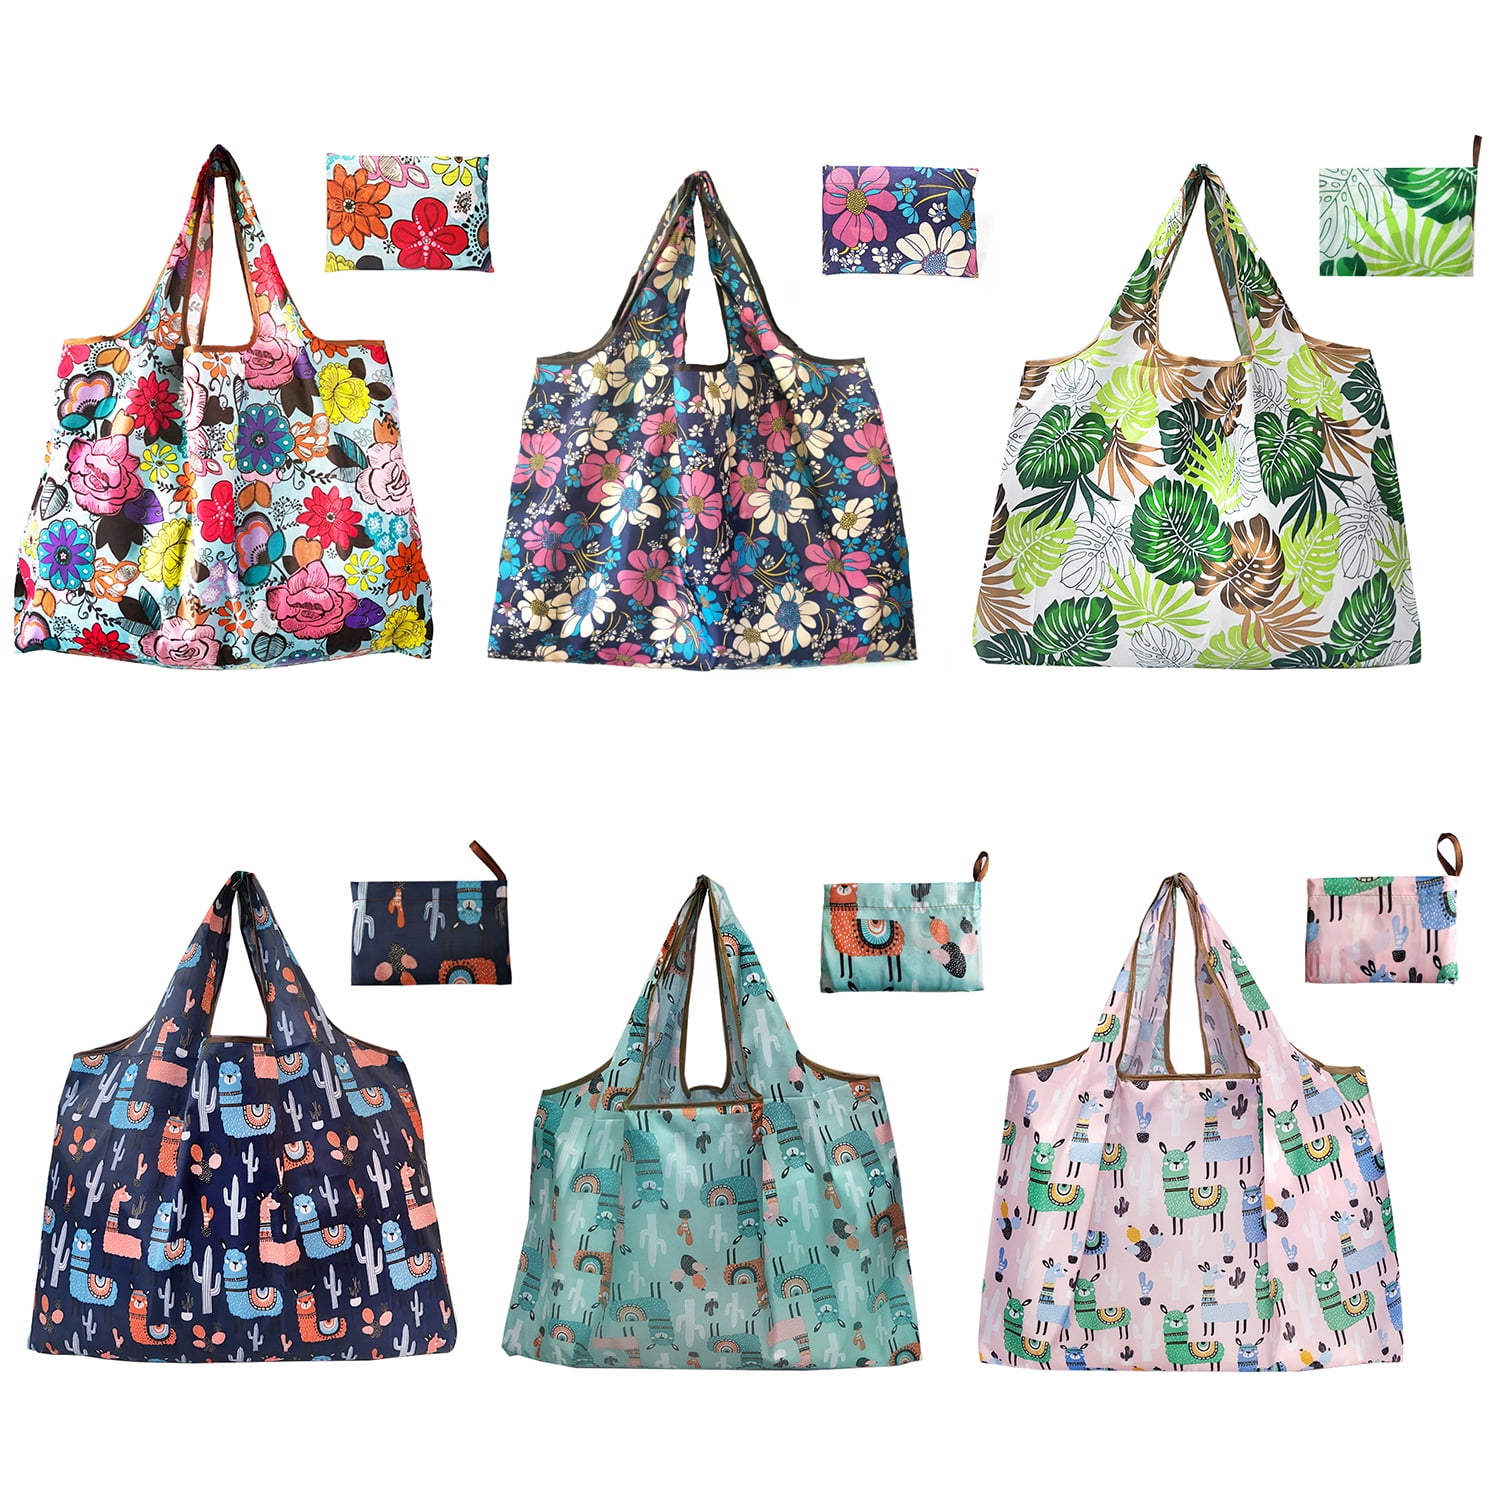 lbs 20 KG Extra Large & by Hold 44 Details about   6 Pack Reusable Handle Grocery Tote Bags 